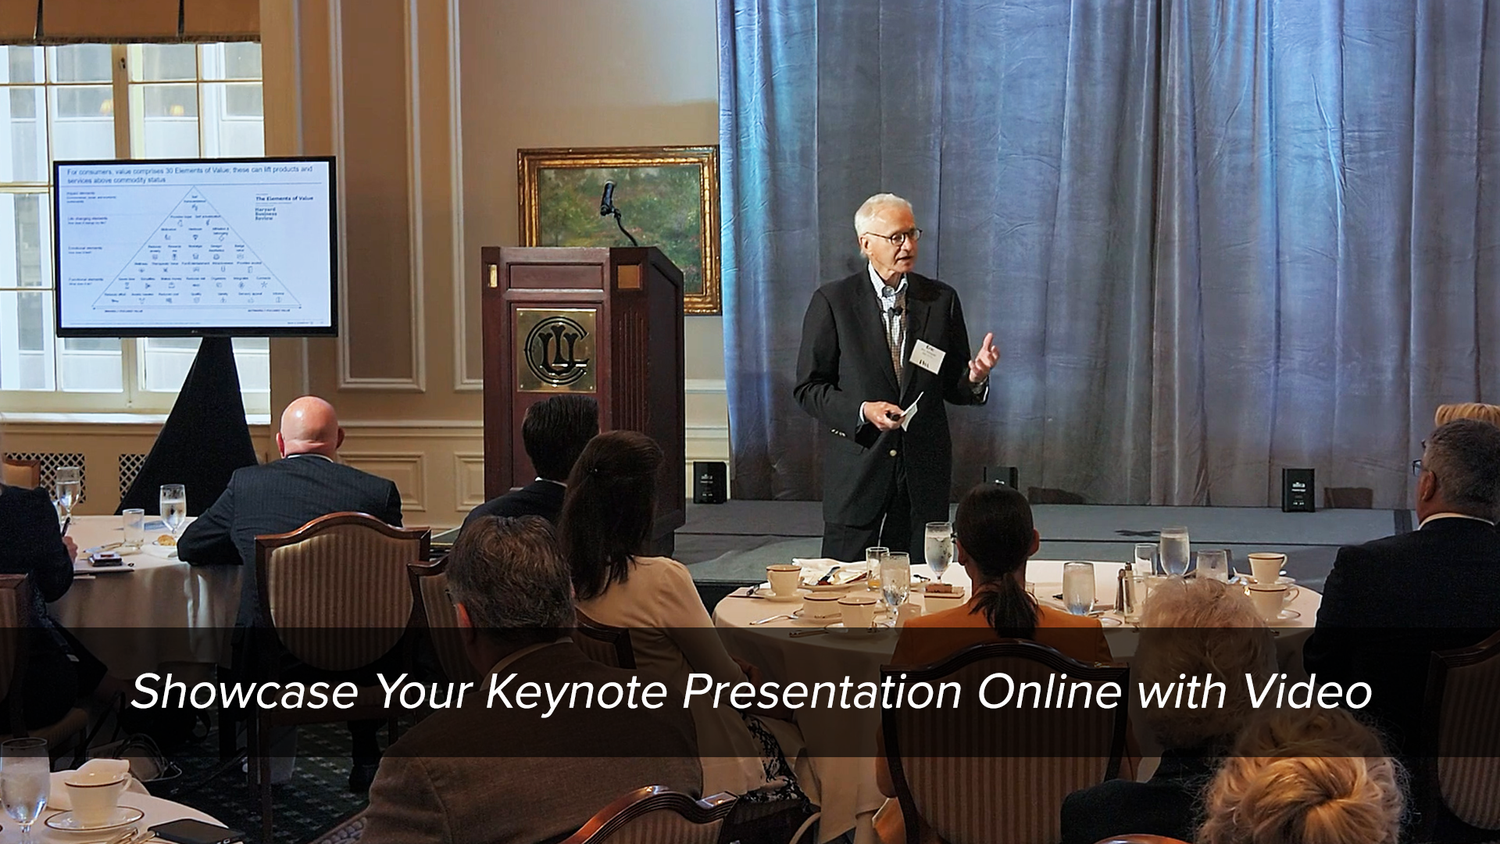 A presenter delivering a keynote speech to an attentive audience in a formal setting, with a text overlay suggesting the sharing of such presentations online through video.